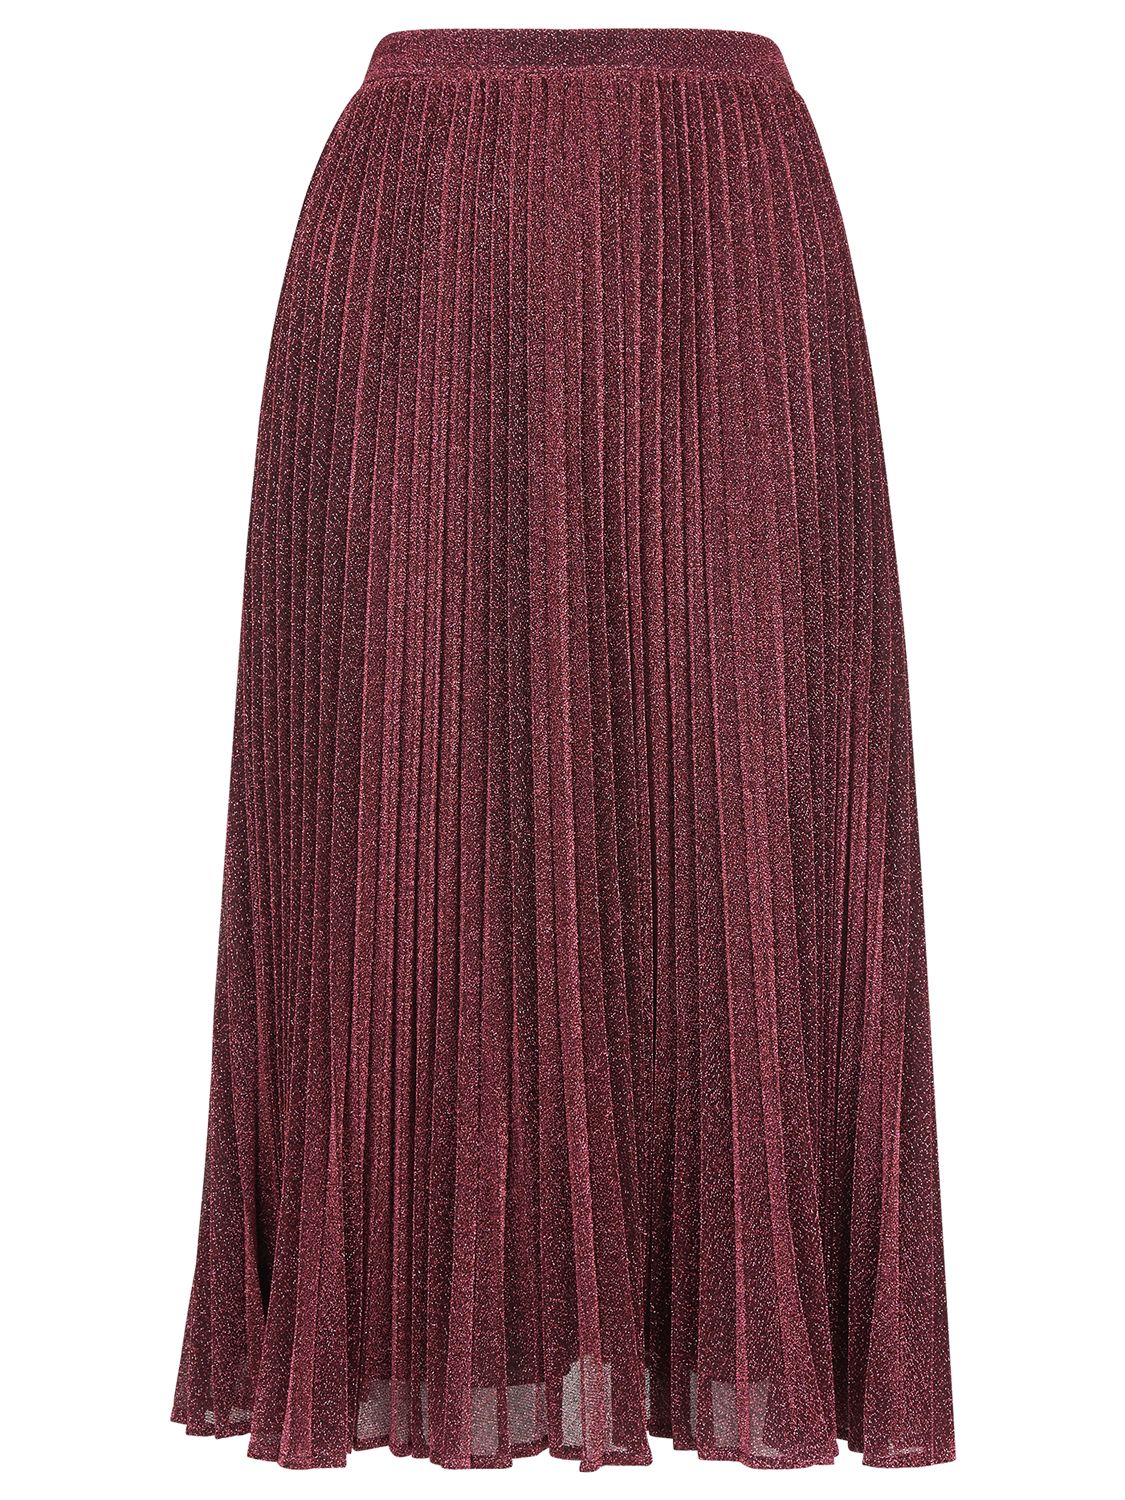 Whistles Sparkle Pleated Skirt, Pink, 6